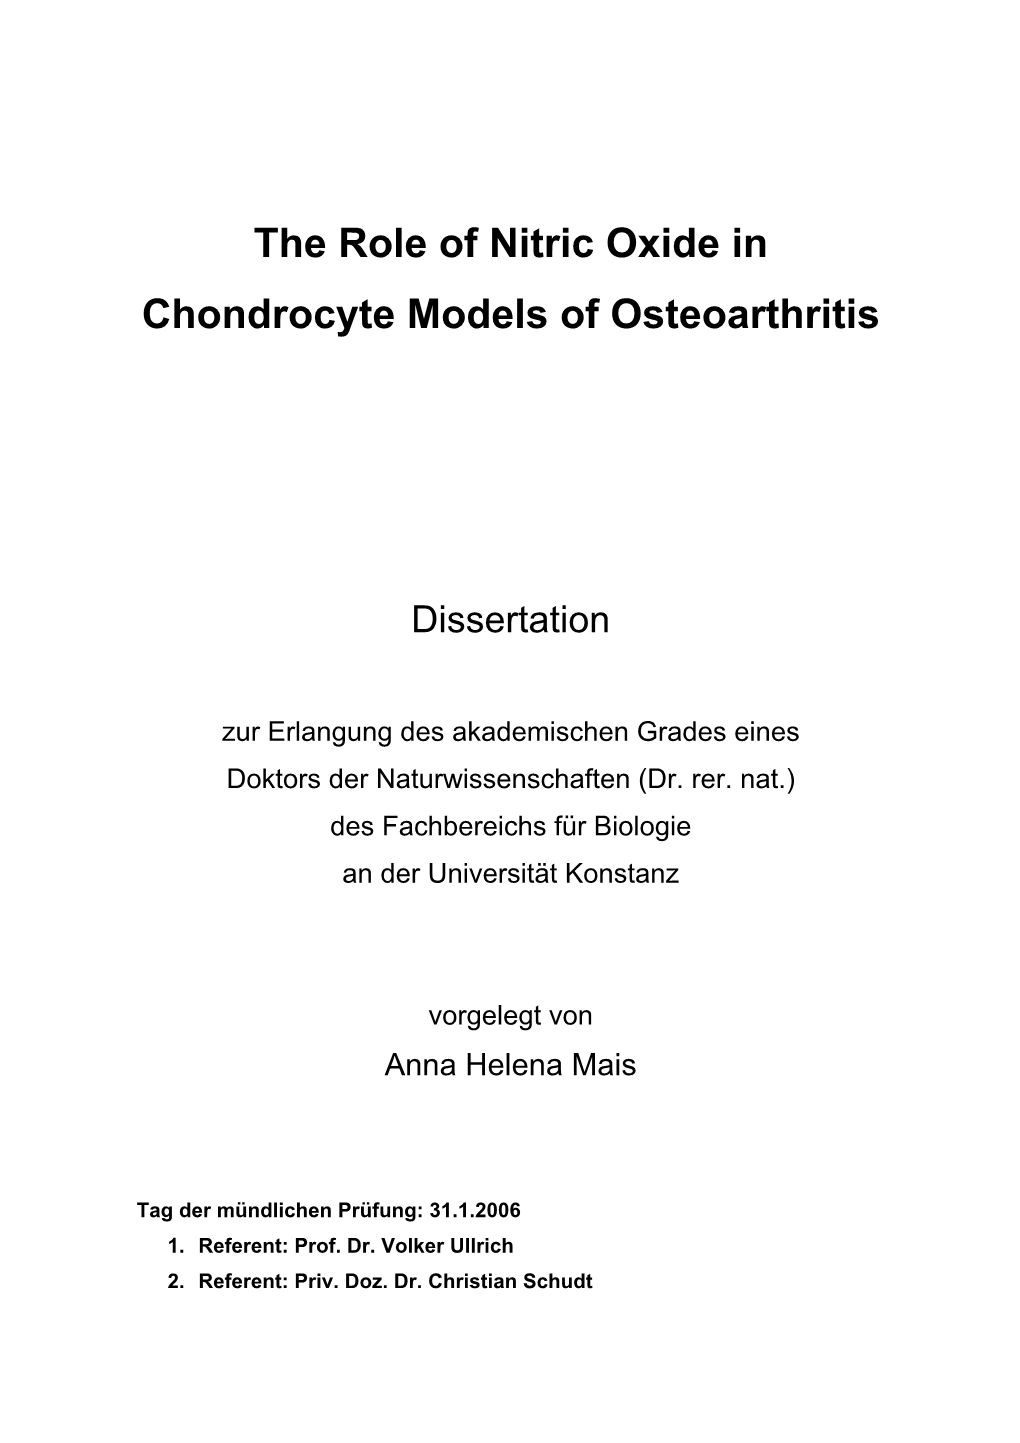 The Role of Nitric Oxide in Chondrocyte Models of Osteoarthritis